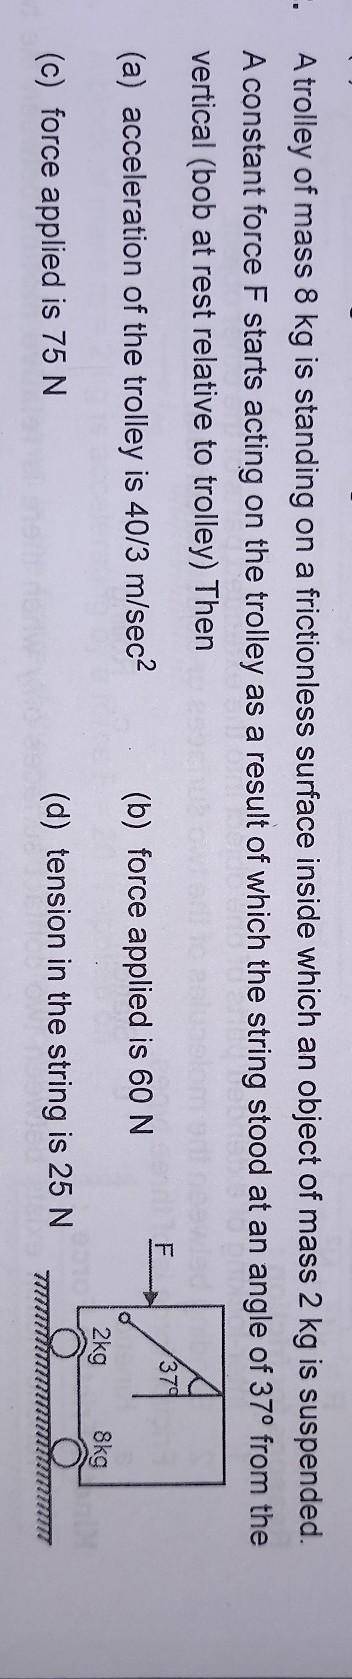 Can someone Help me with this question ?(I need proper Explanation if possible)Thanks for Answeri